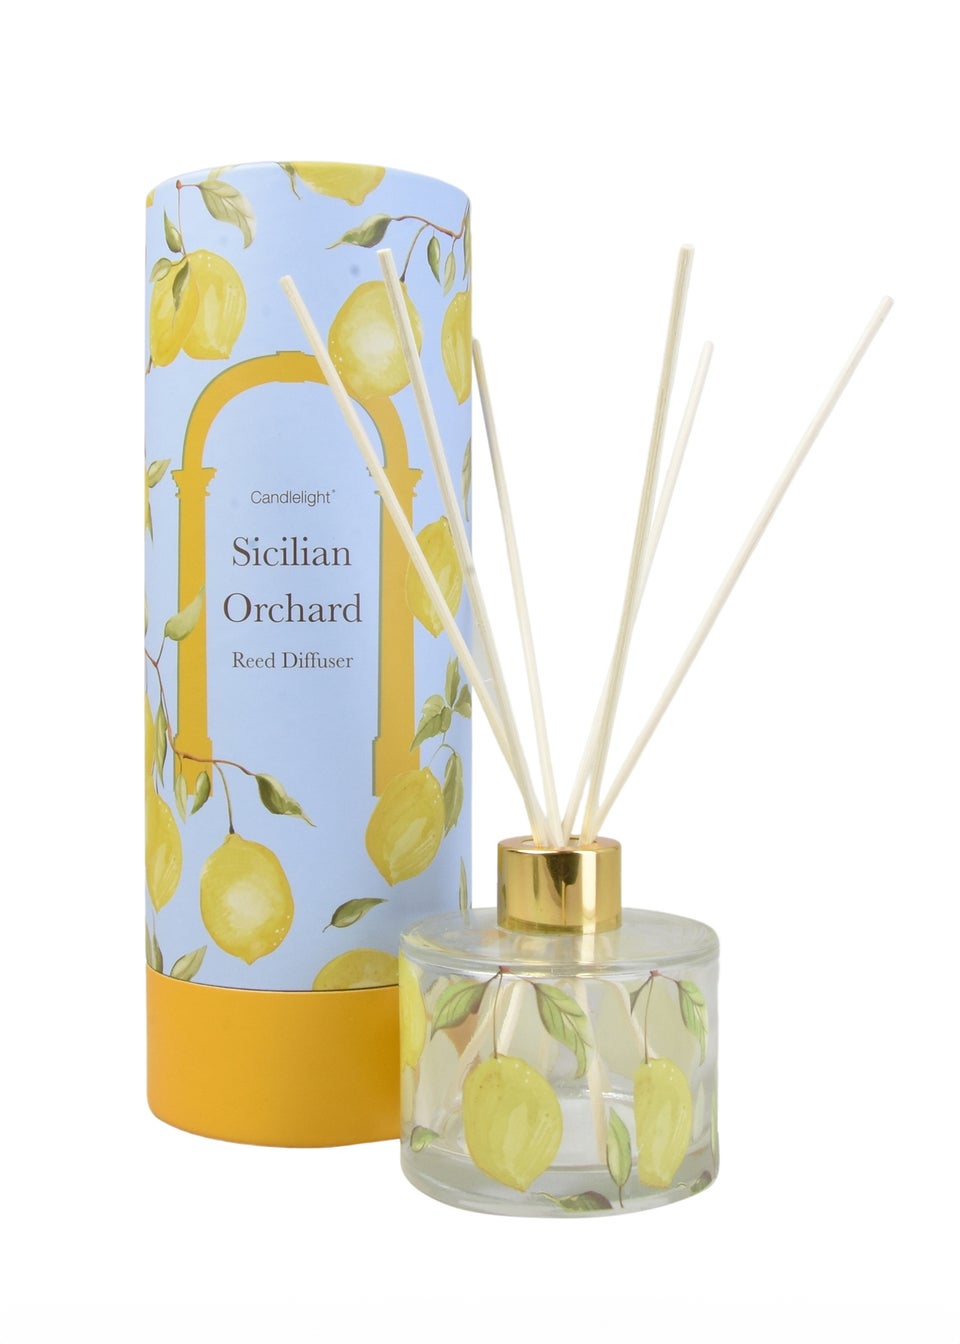 Candlelight Sicilian Orchard Reed Diffuser (150ml)